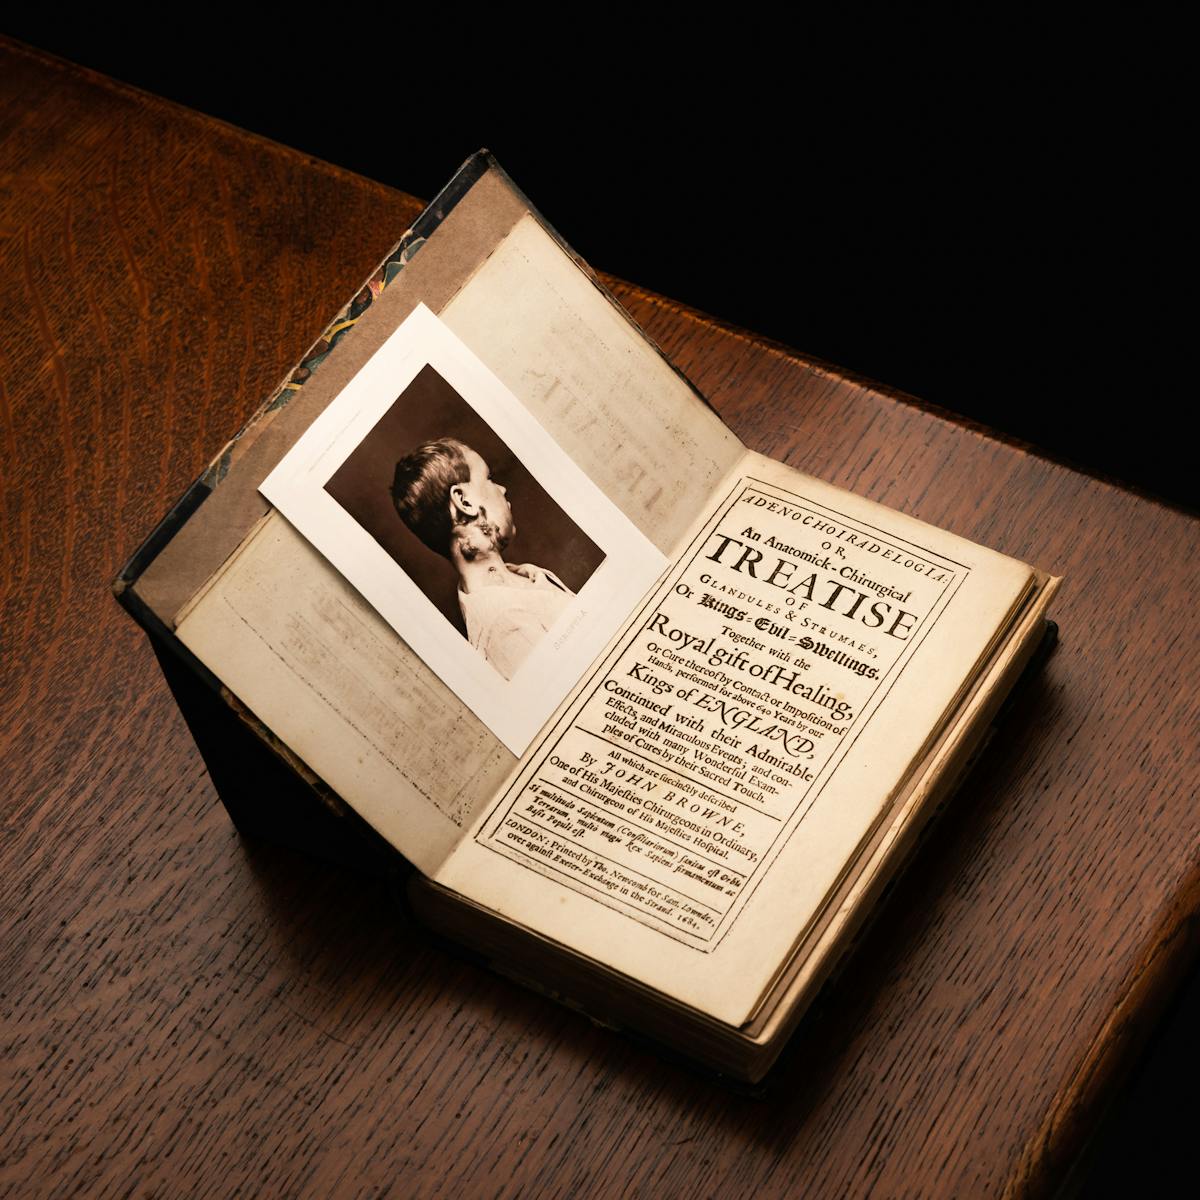 A photograph of a printed book positioned on the corner of a dark wooden table. The book is open at the title page, which reads in part Treatise of Glandules and Strumaes or Kings Evil Swellings. Positioned on the opposite page is photograph of a young boy viewed in profile, running up his neck to below his right ear are darkened swellings.